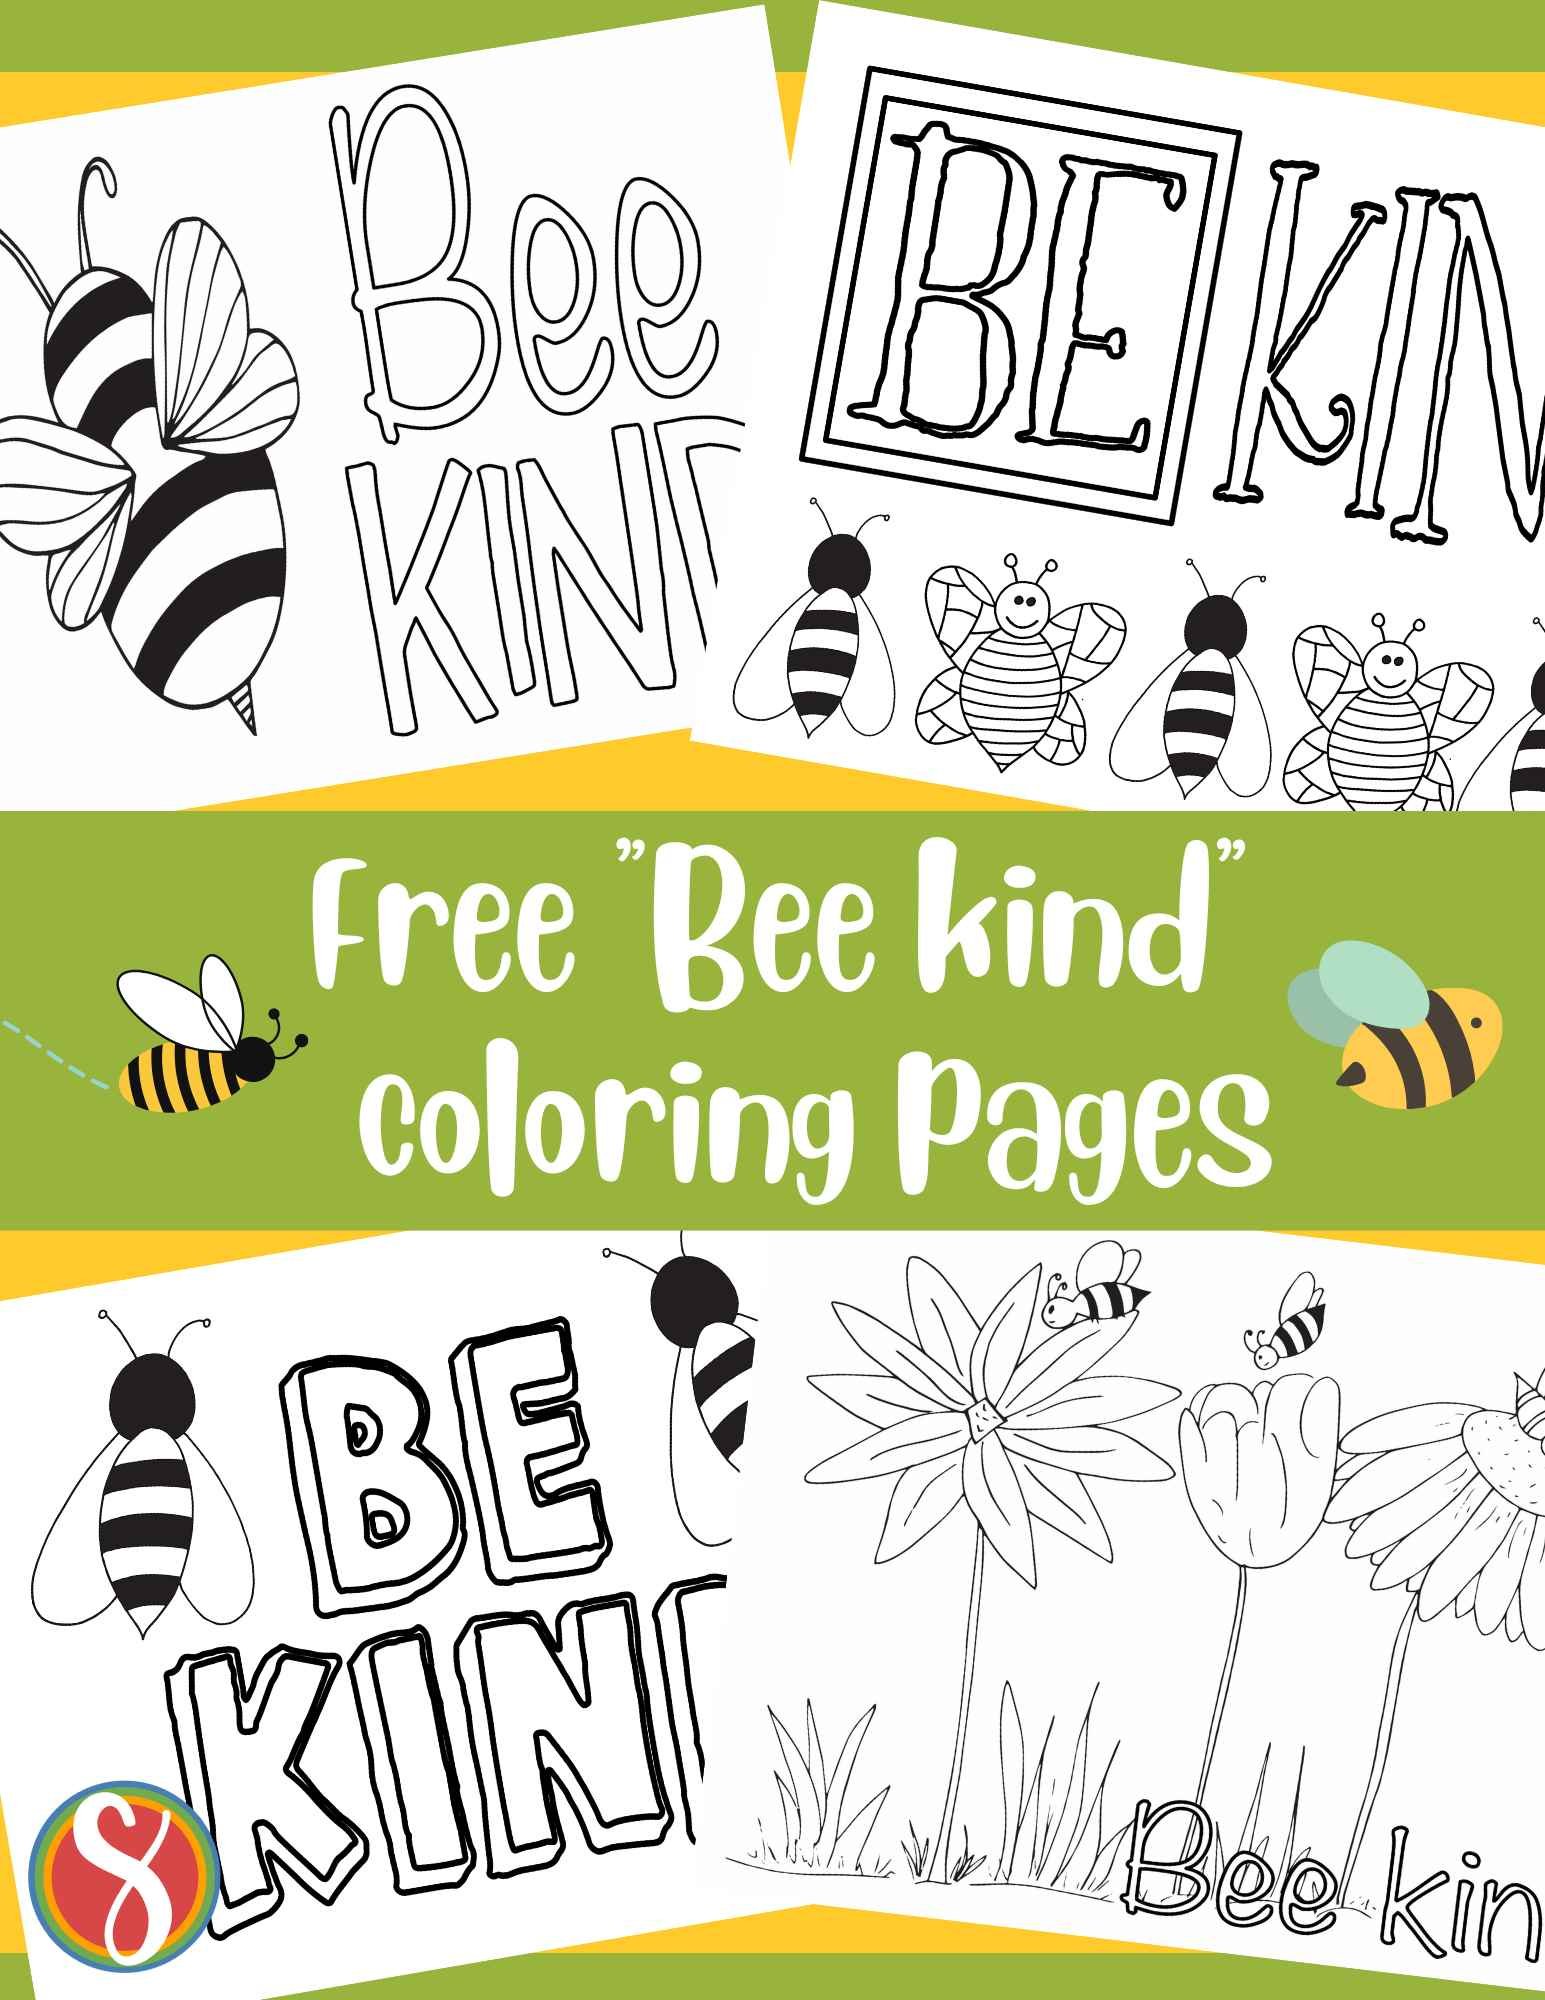 Free bee kind coloring pages â stevie doodles